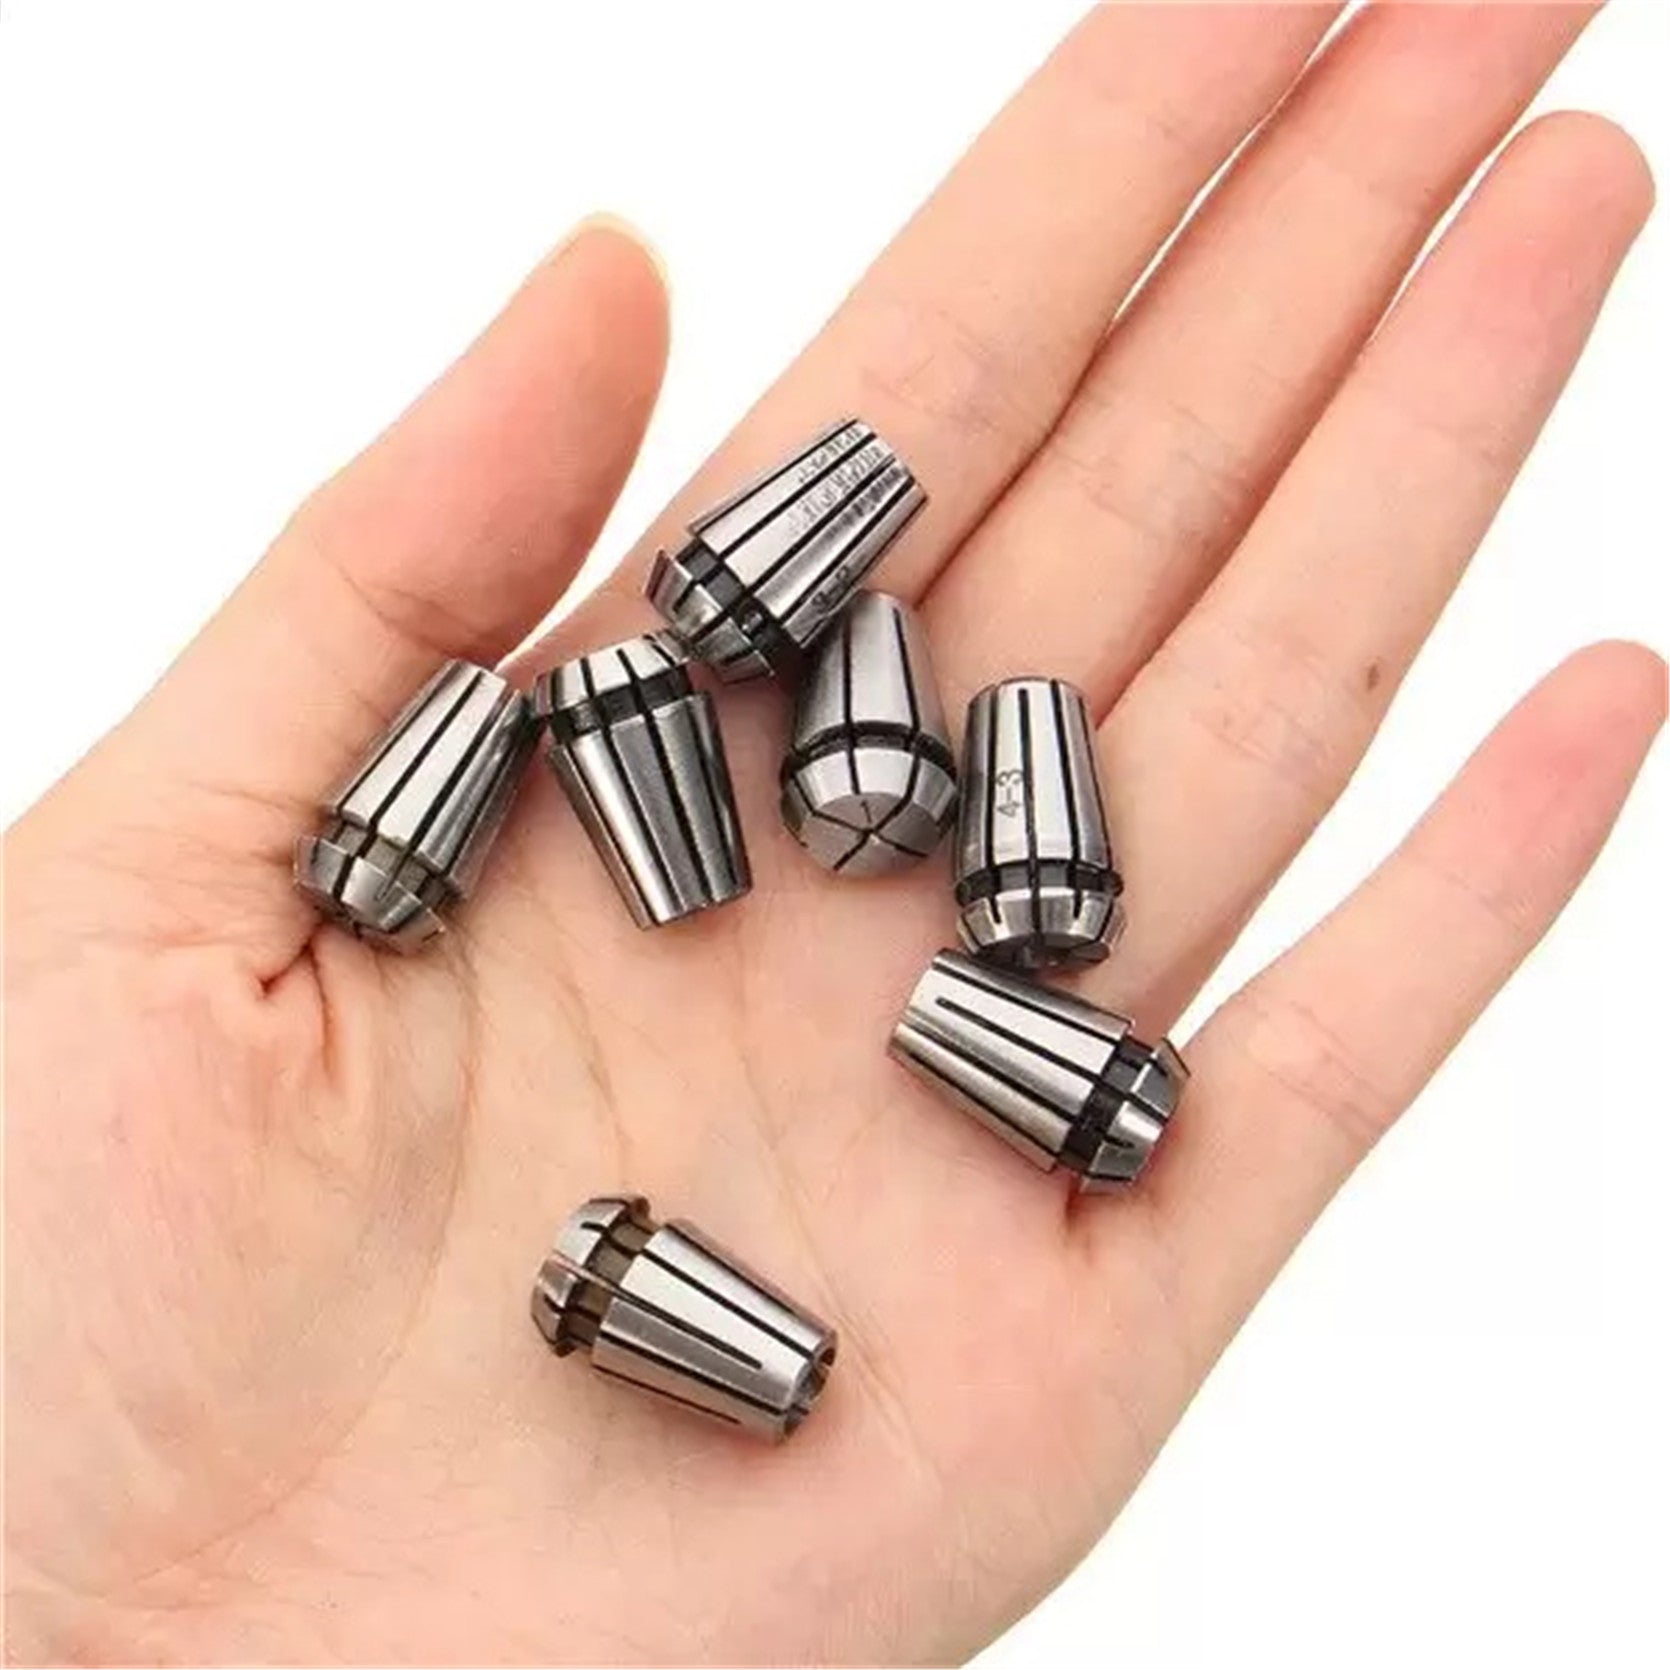 findmall  7Pcs ER11 Spring Collet Set 1/16-1/4 Collet Chuck for CNC Milling Lathe Tool and Engraving Machine Carbon Steel FINDMALLPARTS